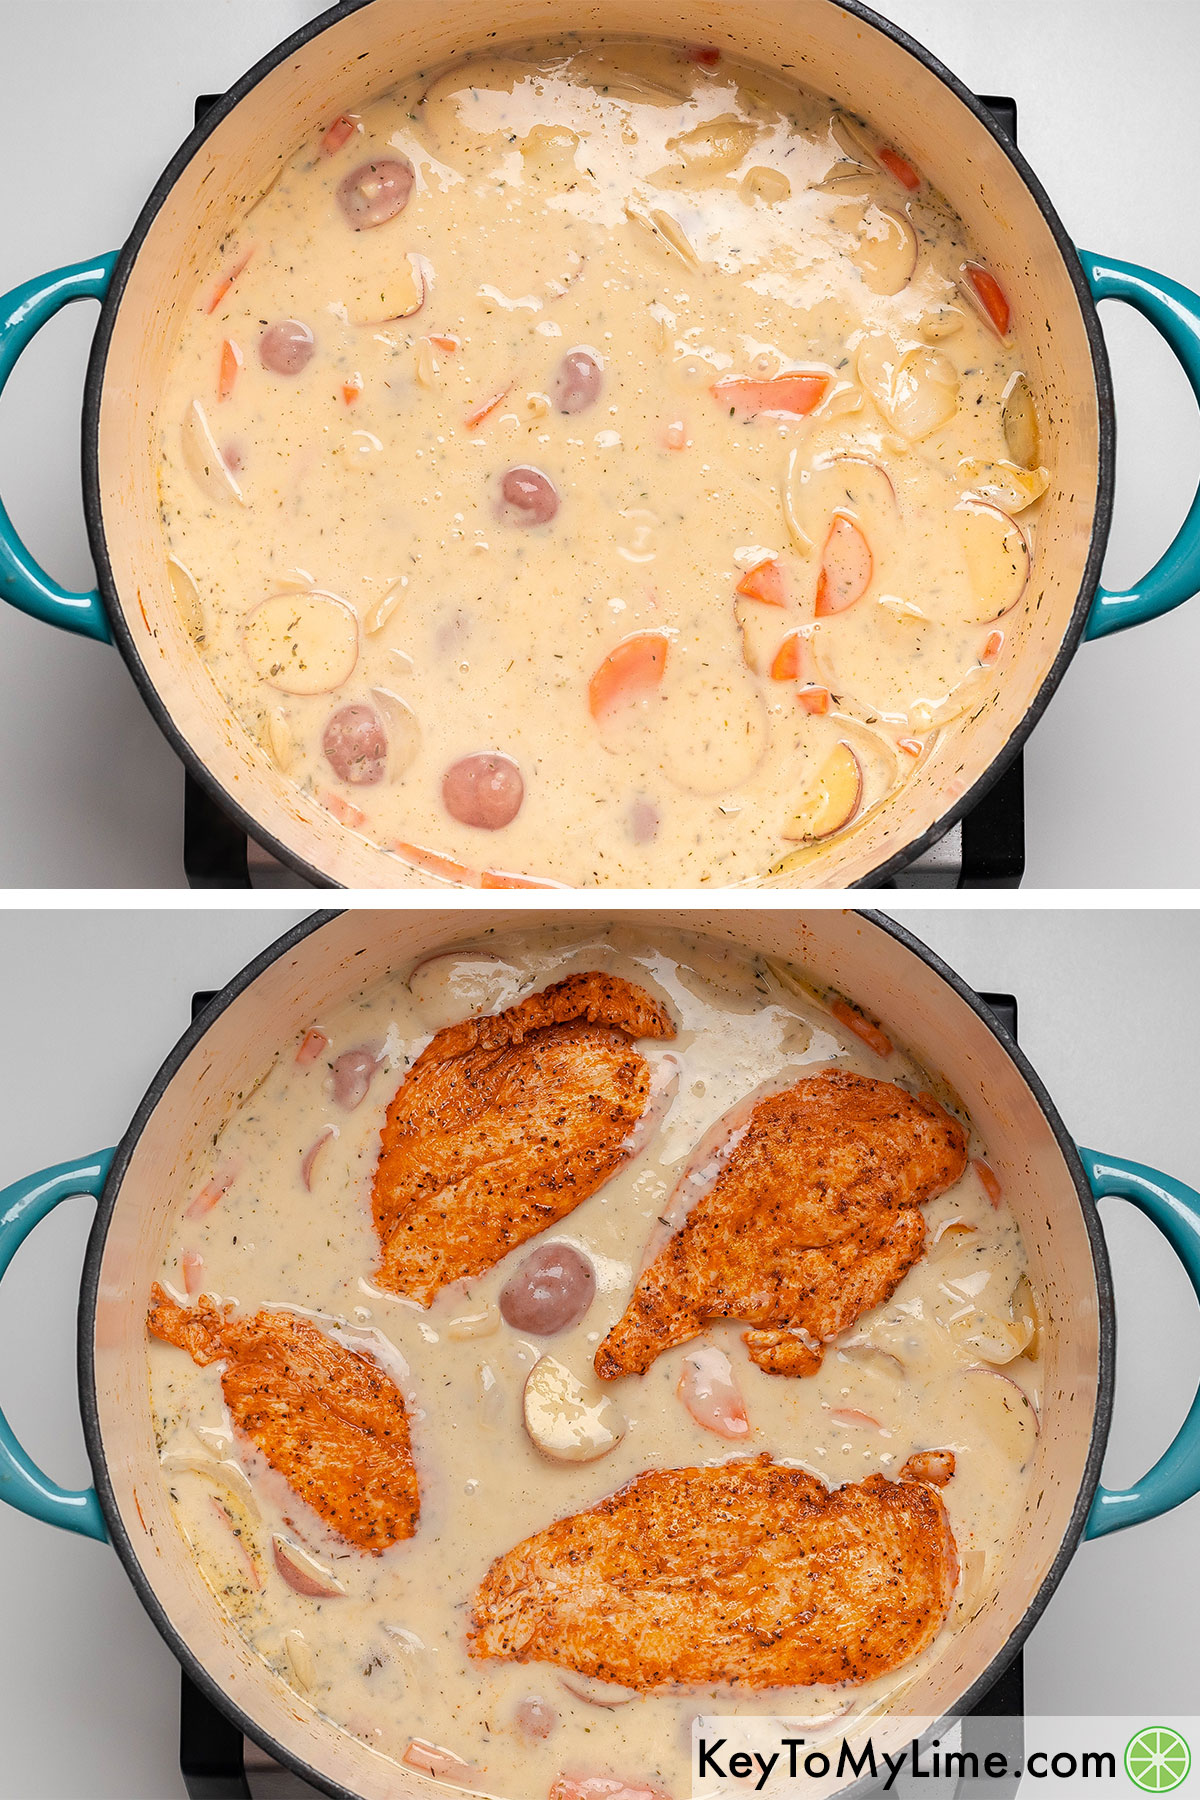 Bringing the creamy mixture to a gentle boil for five minutes then adding in the seared chicken filets.